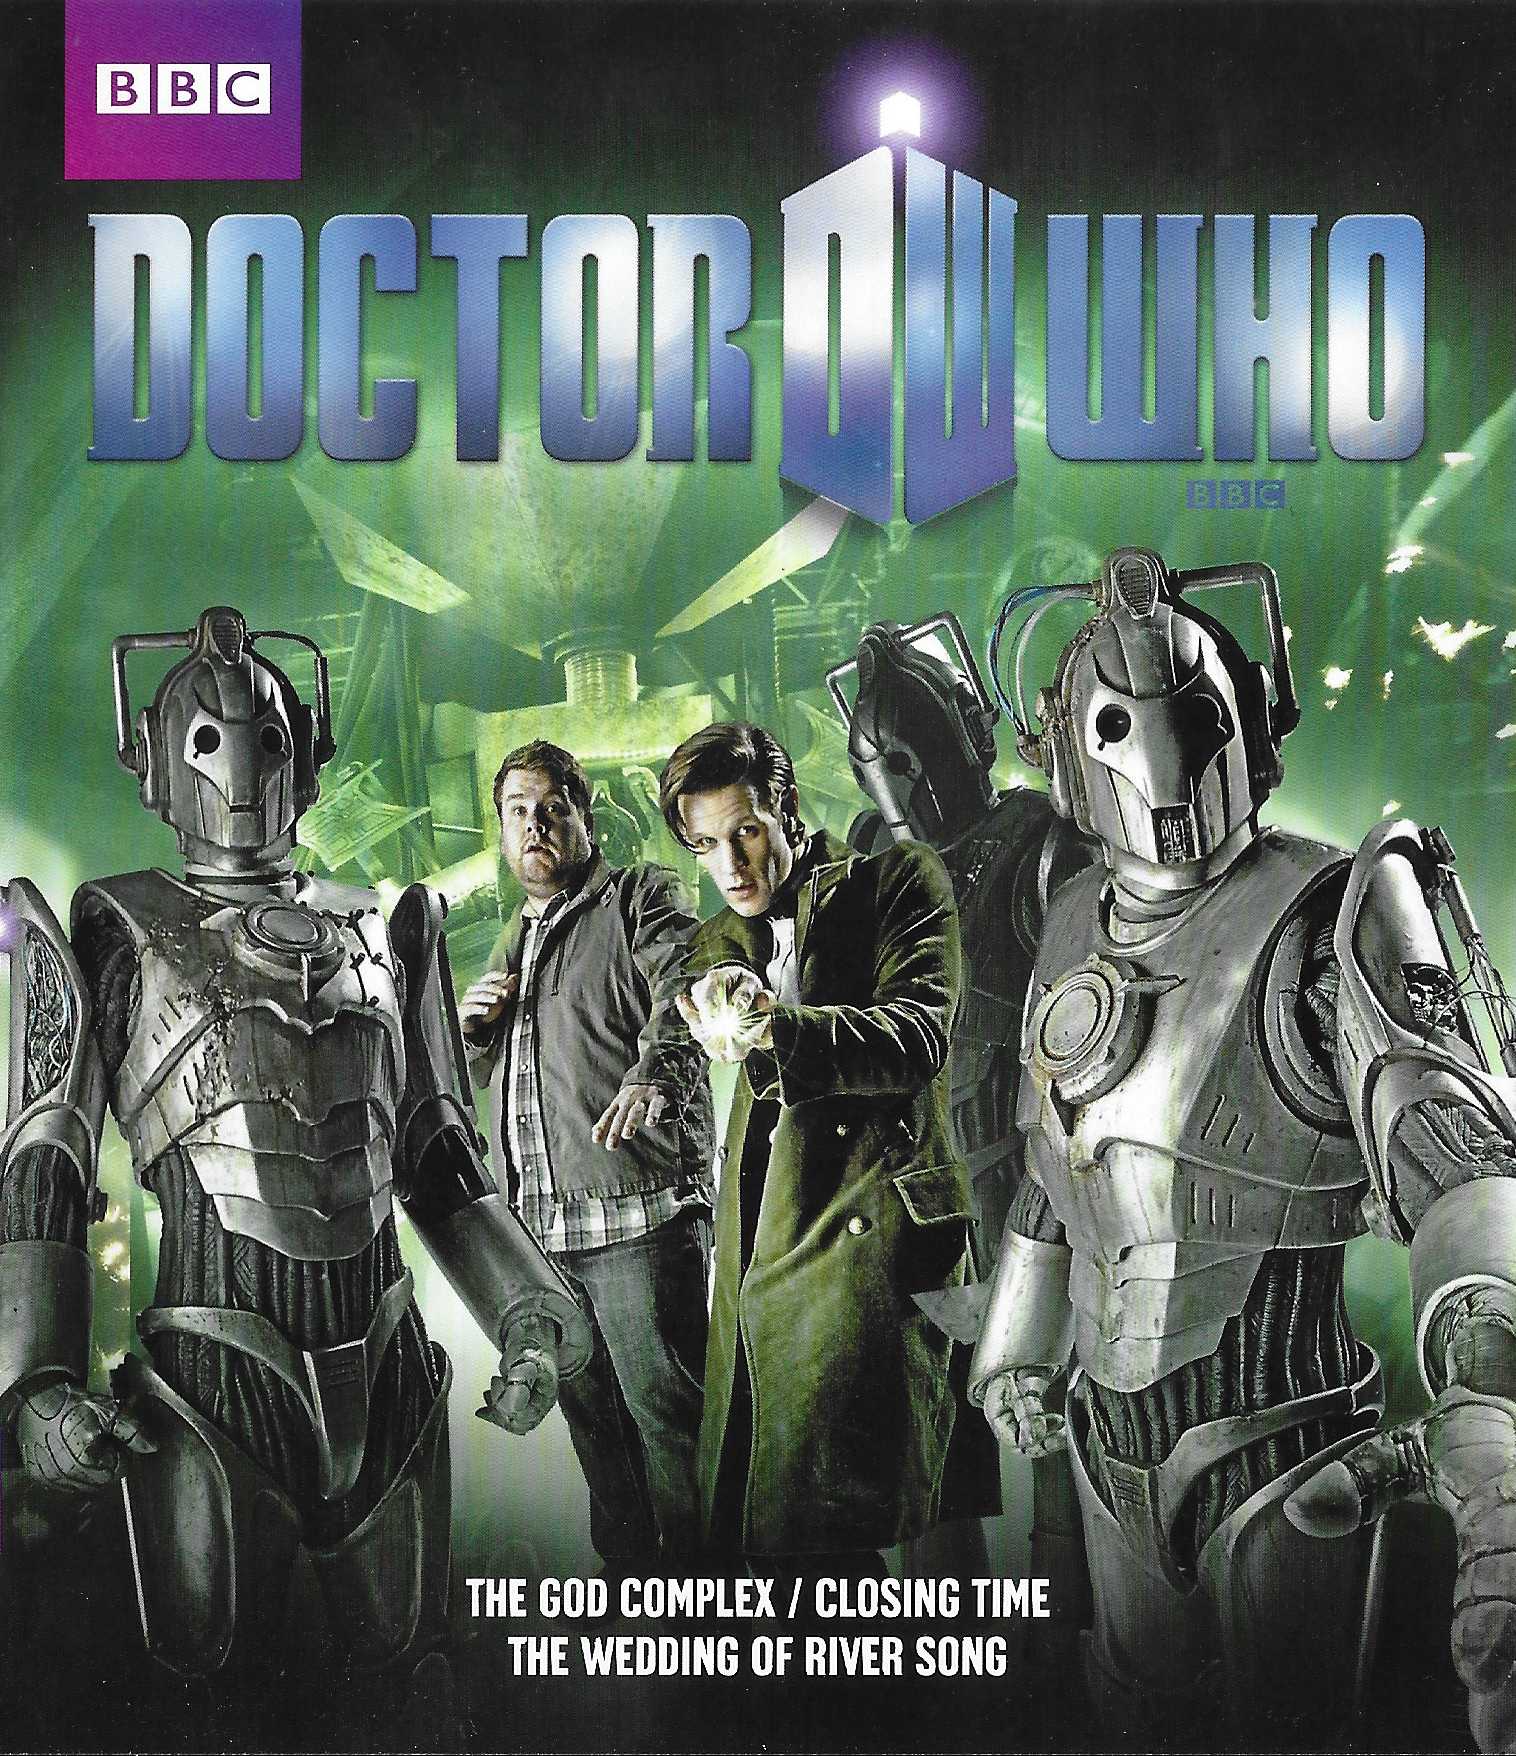 Picture of BBCBD 0152B Doctor Who - Series 6, part 2b by artist Toby Whithouse / Gareth Roberts / Steven Moffat from the BBC blu-rays - Records and Tapes library